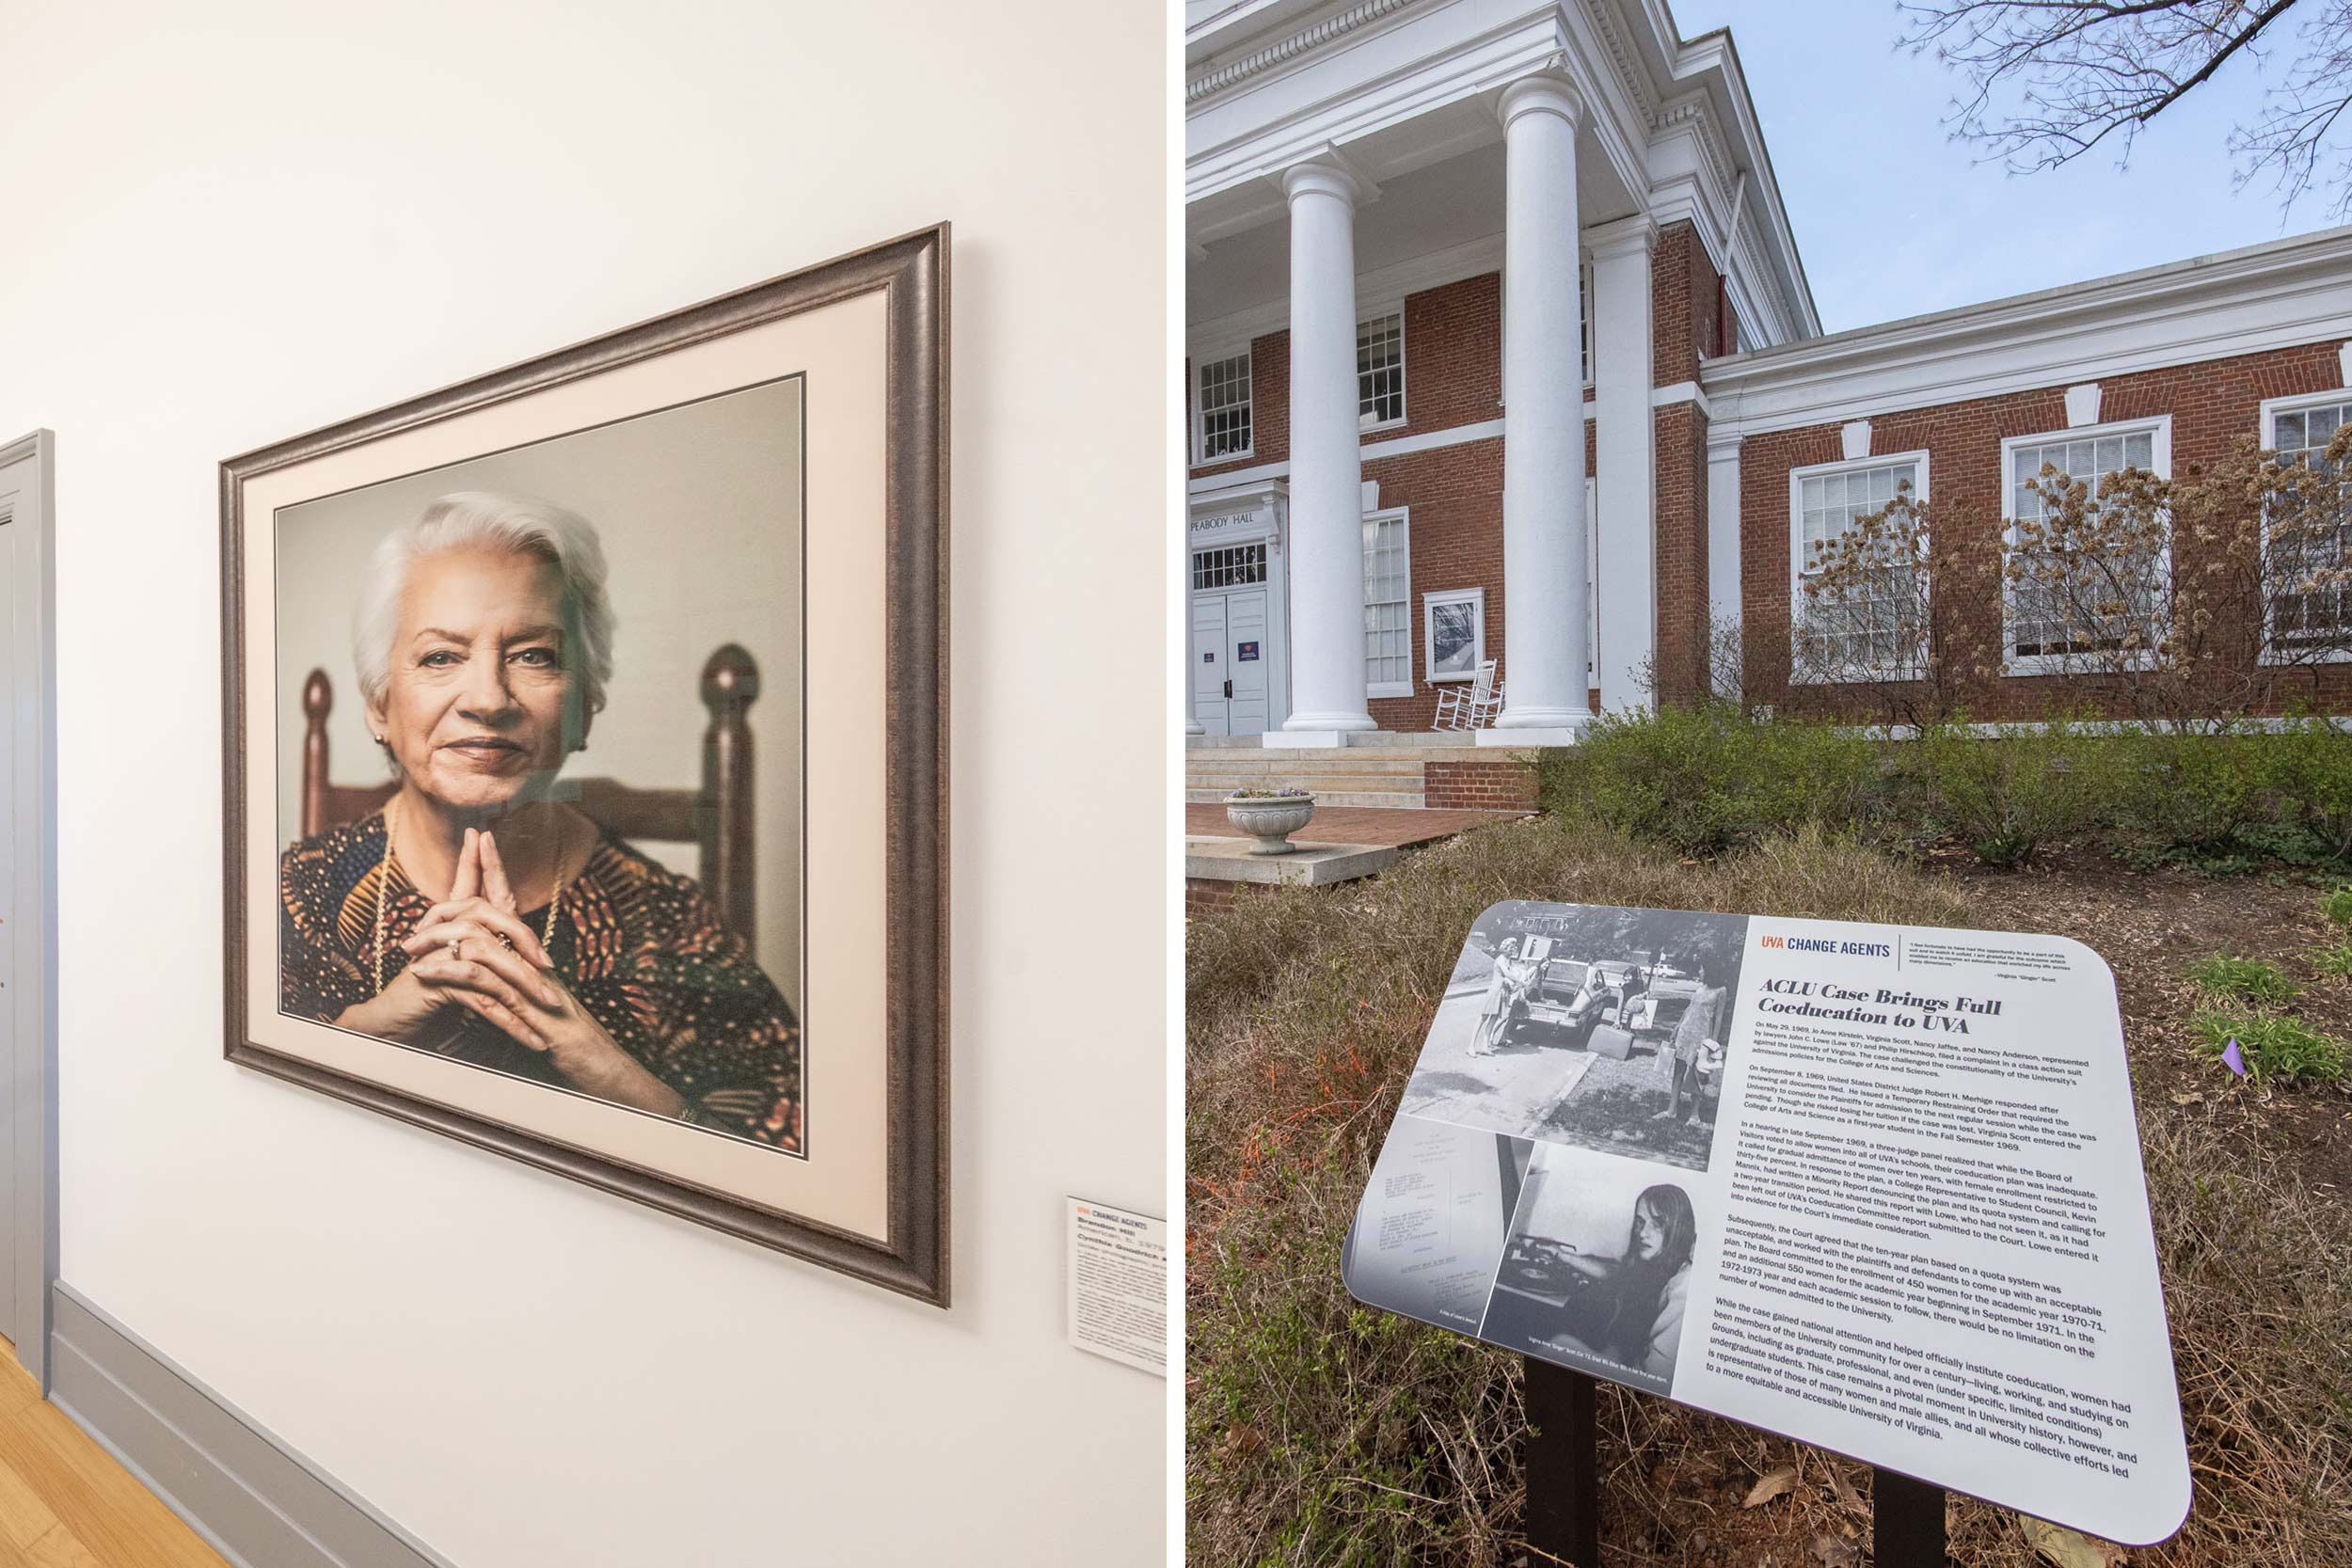 Photos of the coeducation plaque and a portrait of Cynthia Goodrich Kuhn.